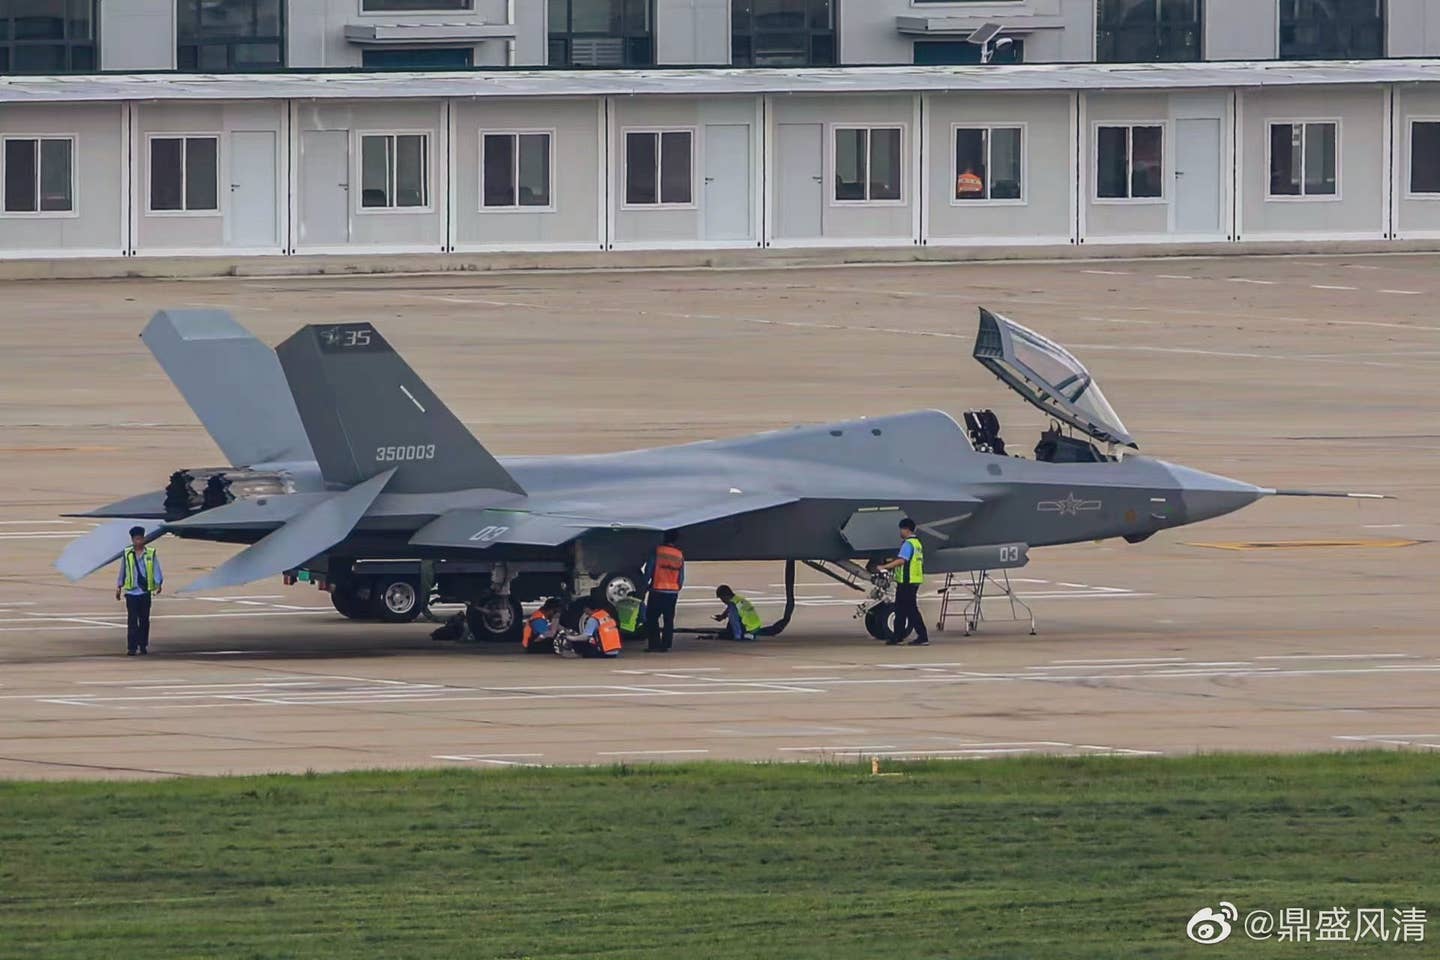 First high-resolution image of the Chinese J-35 stealth fighter jet prototype. <em>Credit: Chinese internet</em>